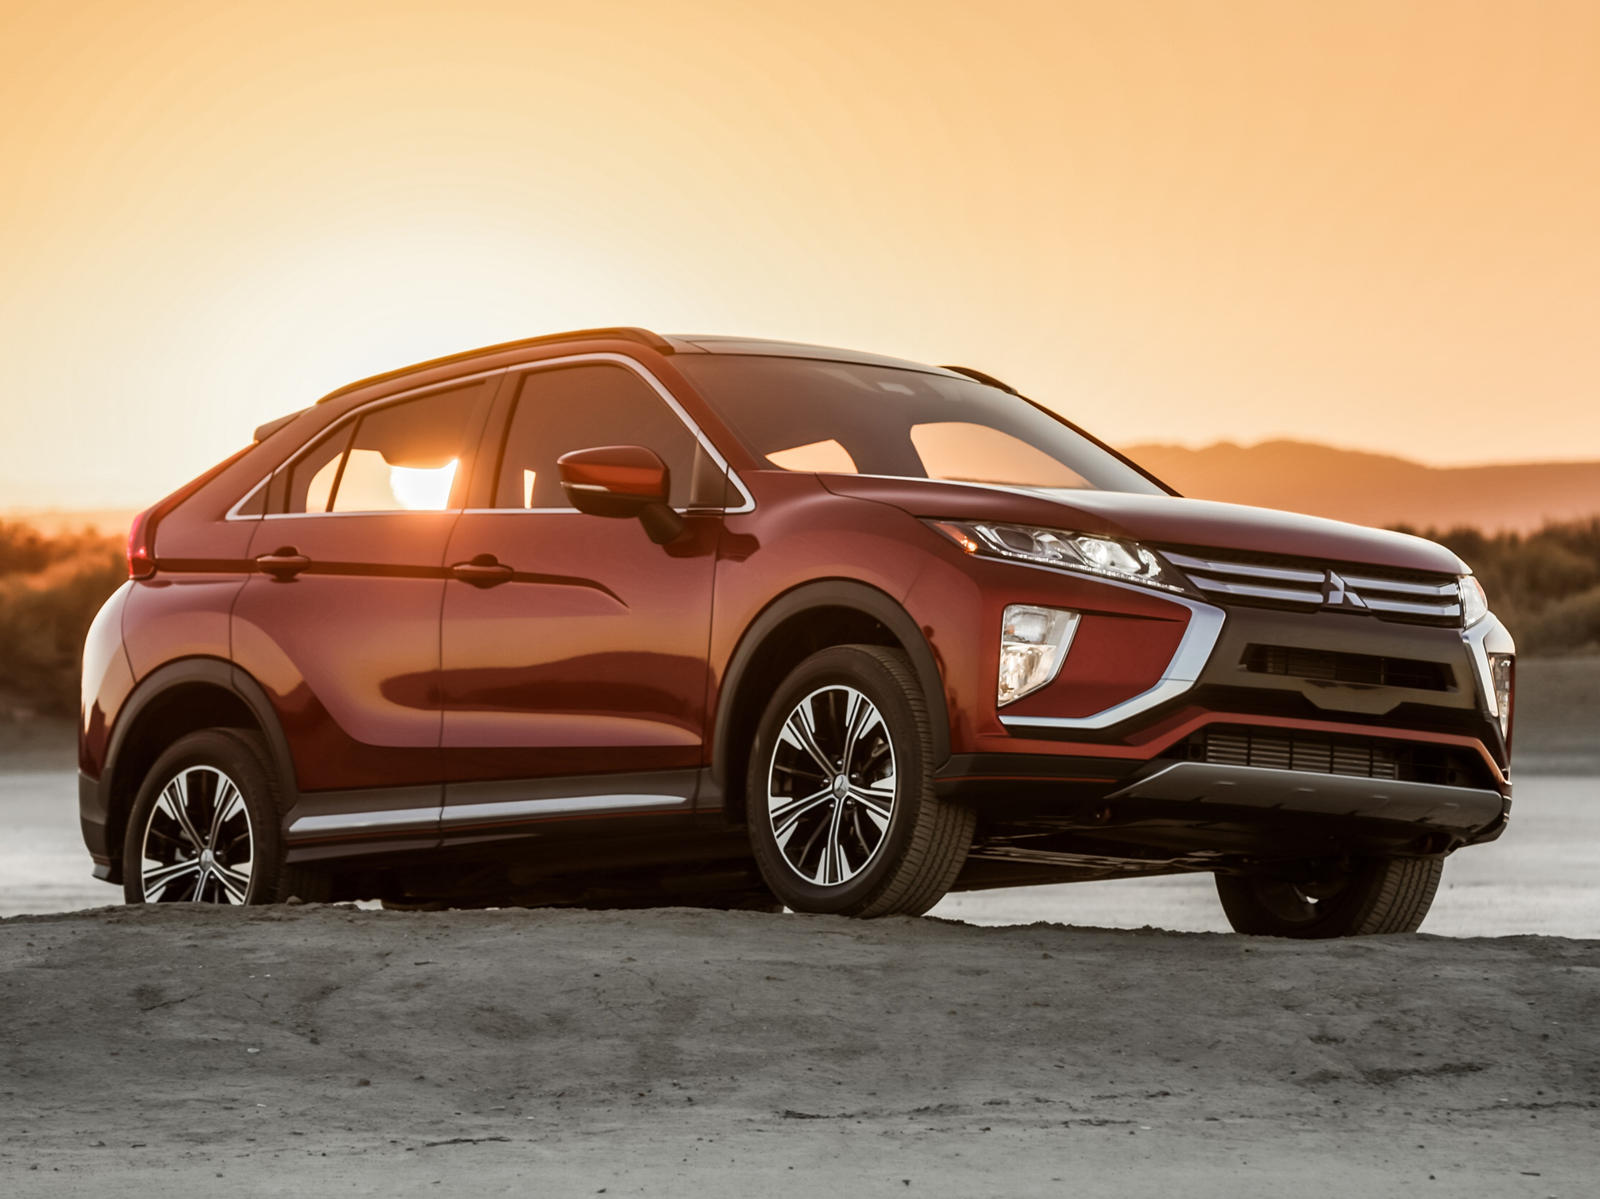 2020 Mitsubishi Eclipse Cross Is A Seriously Safe Crossover | CarBuzz